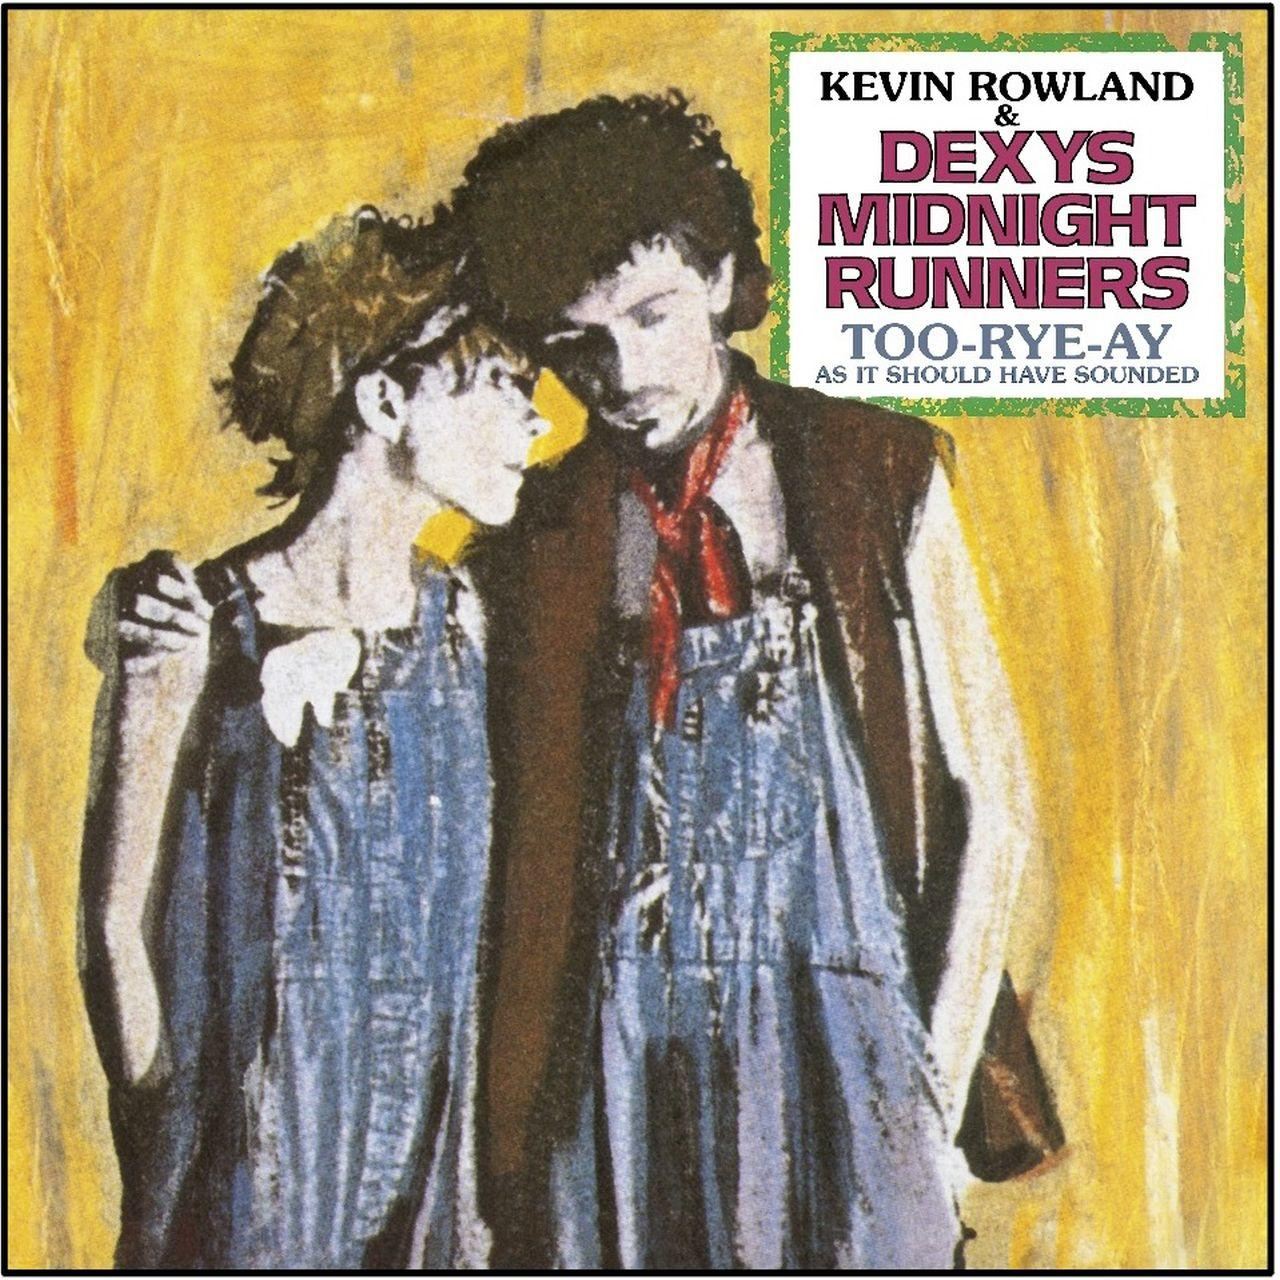 Kevin Rowland Have Anniversary Sounded It - Midnight - (Deluxe As (CD) Too-Rye-Ay, Runners Remix) & Dexy\'s Should Edition) (40th